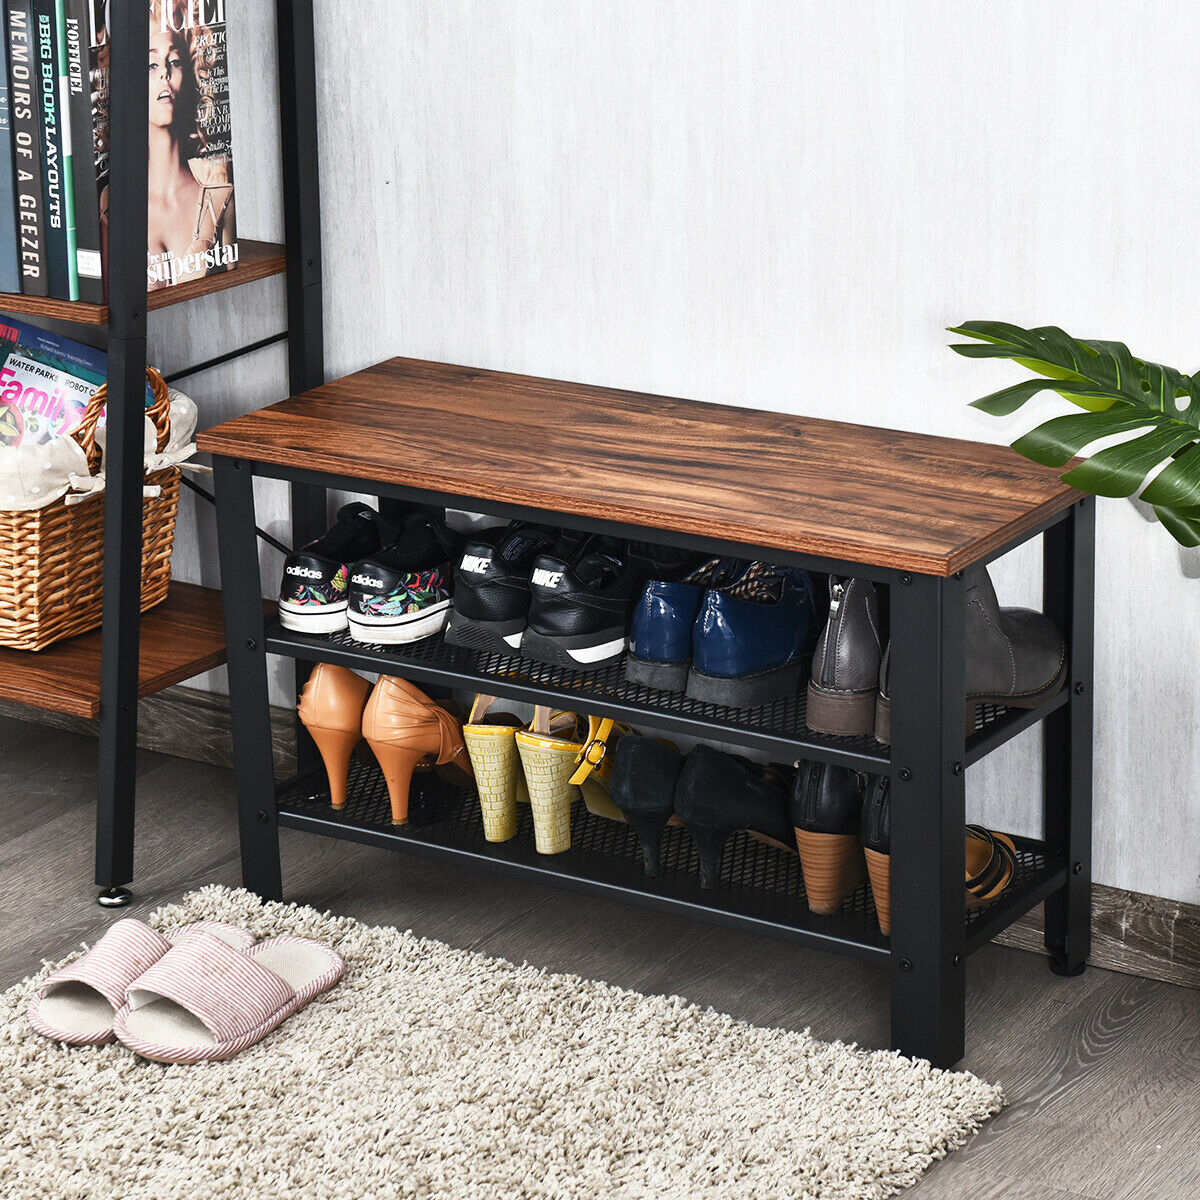 3-Tier Shoe Rack Industrial Shoe Bench With Storage Shelves For LivingRoom - Silver And Brown